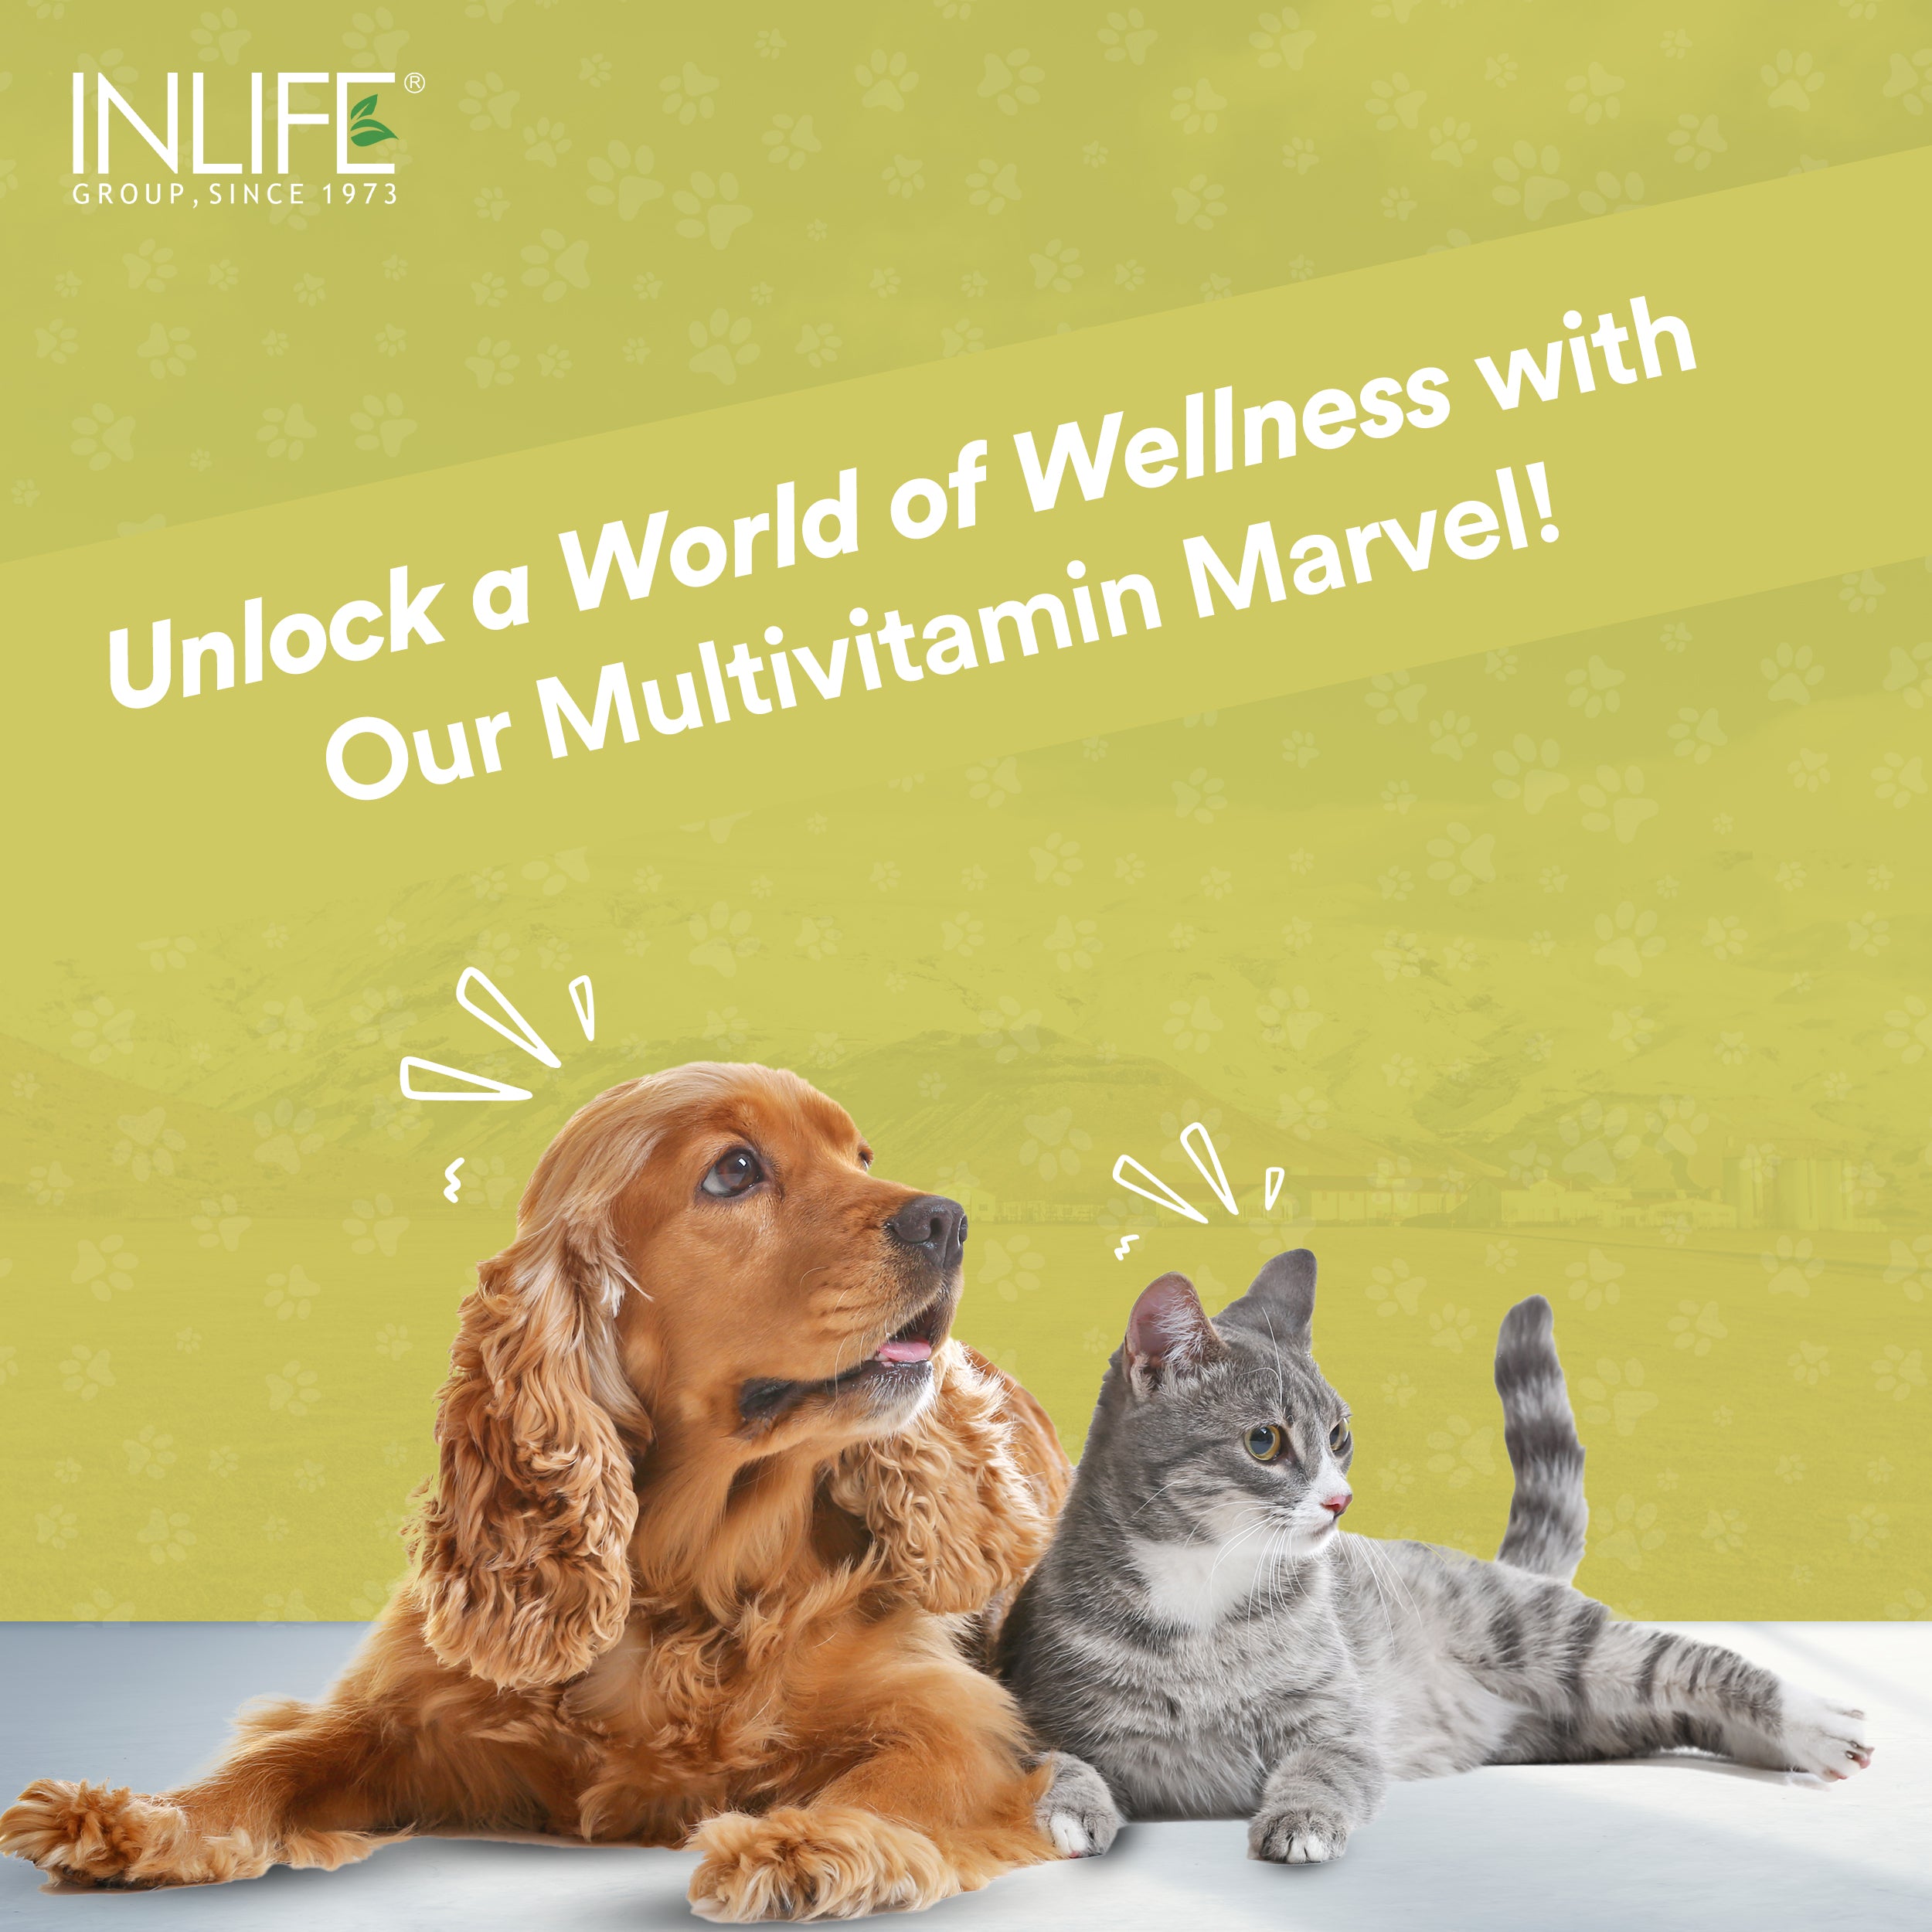 INLIFE Multivitamins Supplement for Dogs for Healthy Growth, Skin & Coat - 60 Tablets